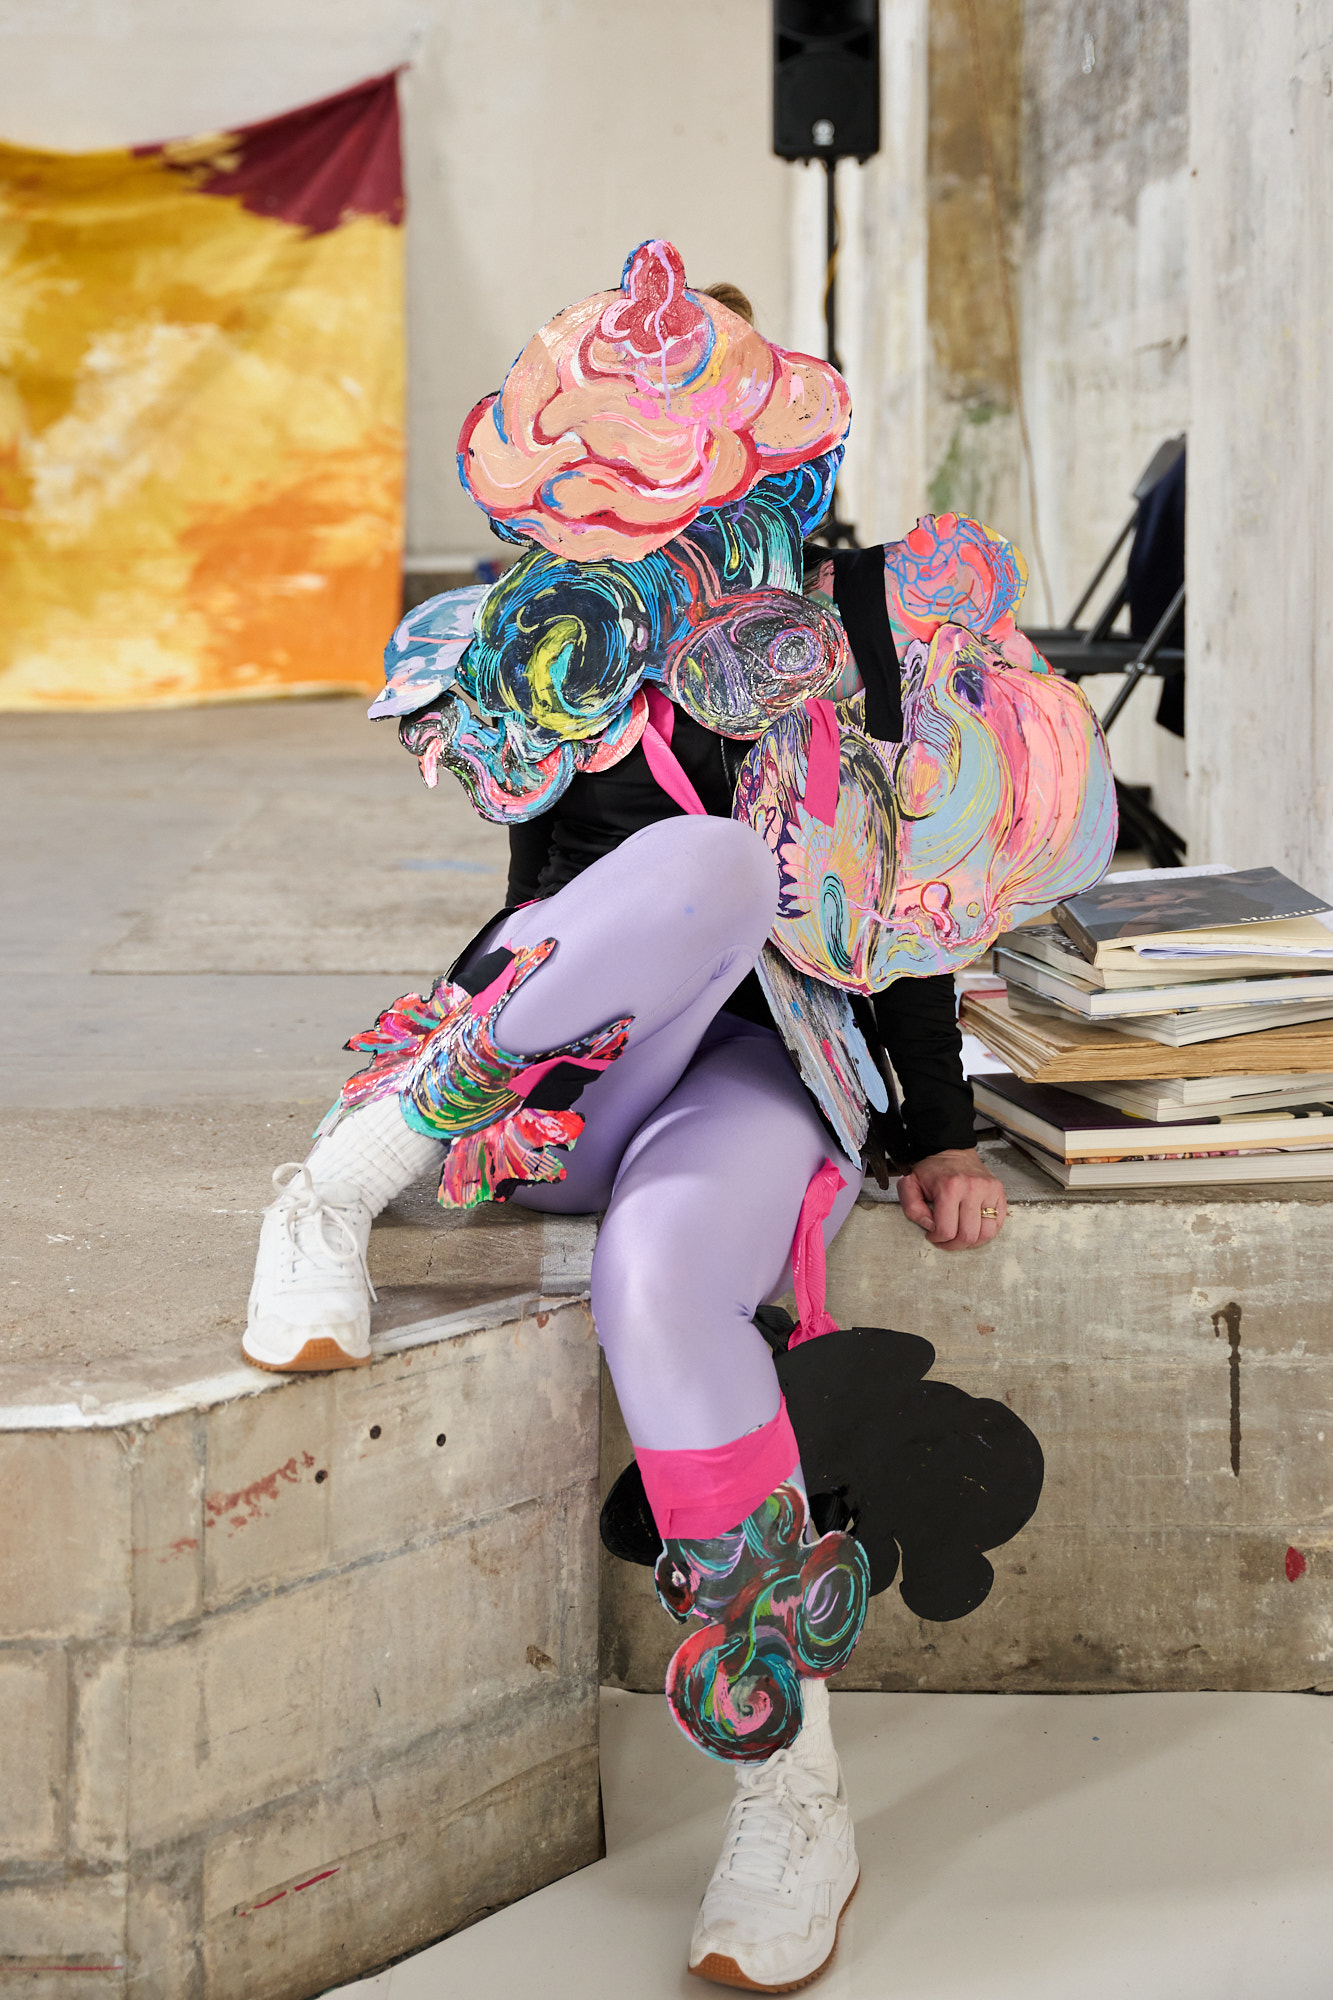 A performer in lilac leggings with colourful painted accessories covering their face sits with one leg resting above the other.